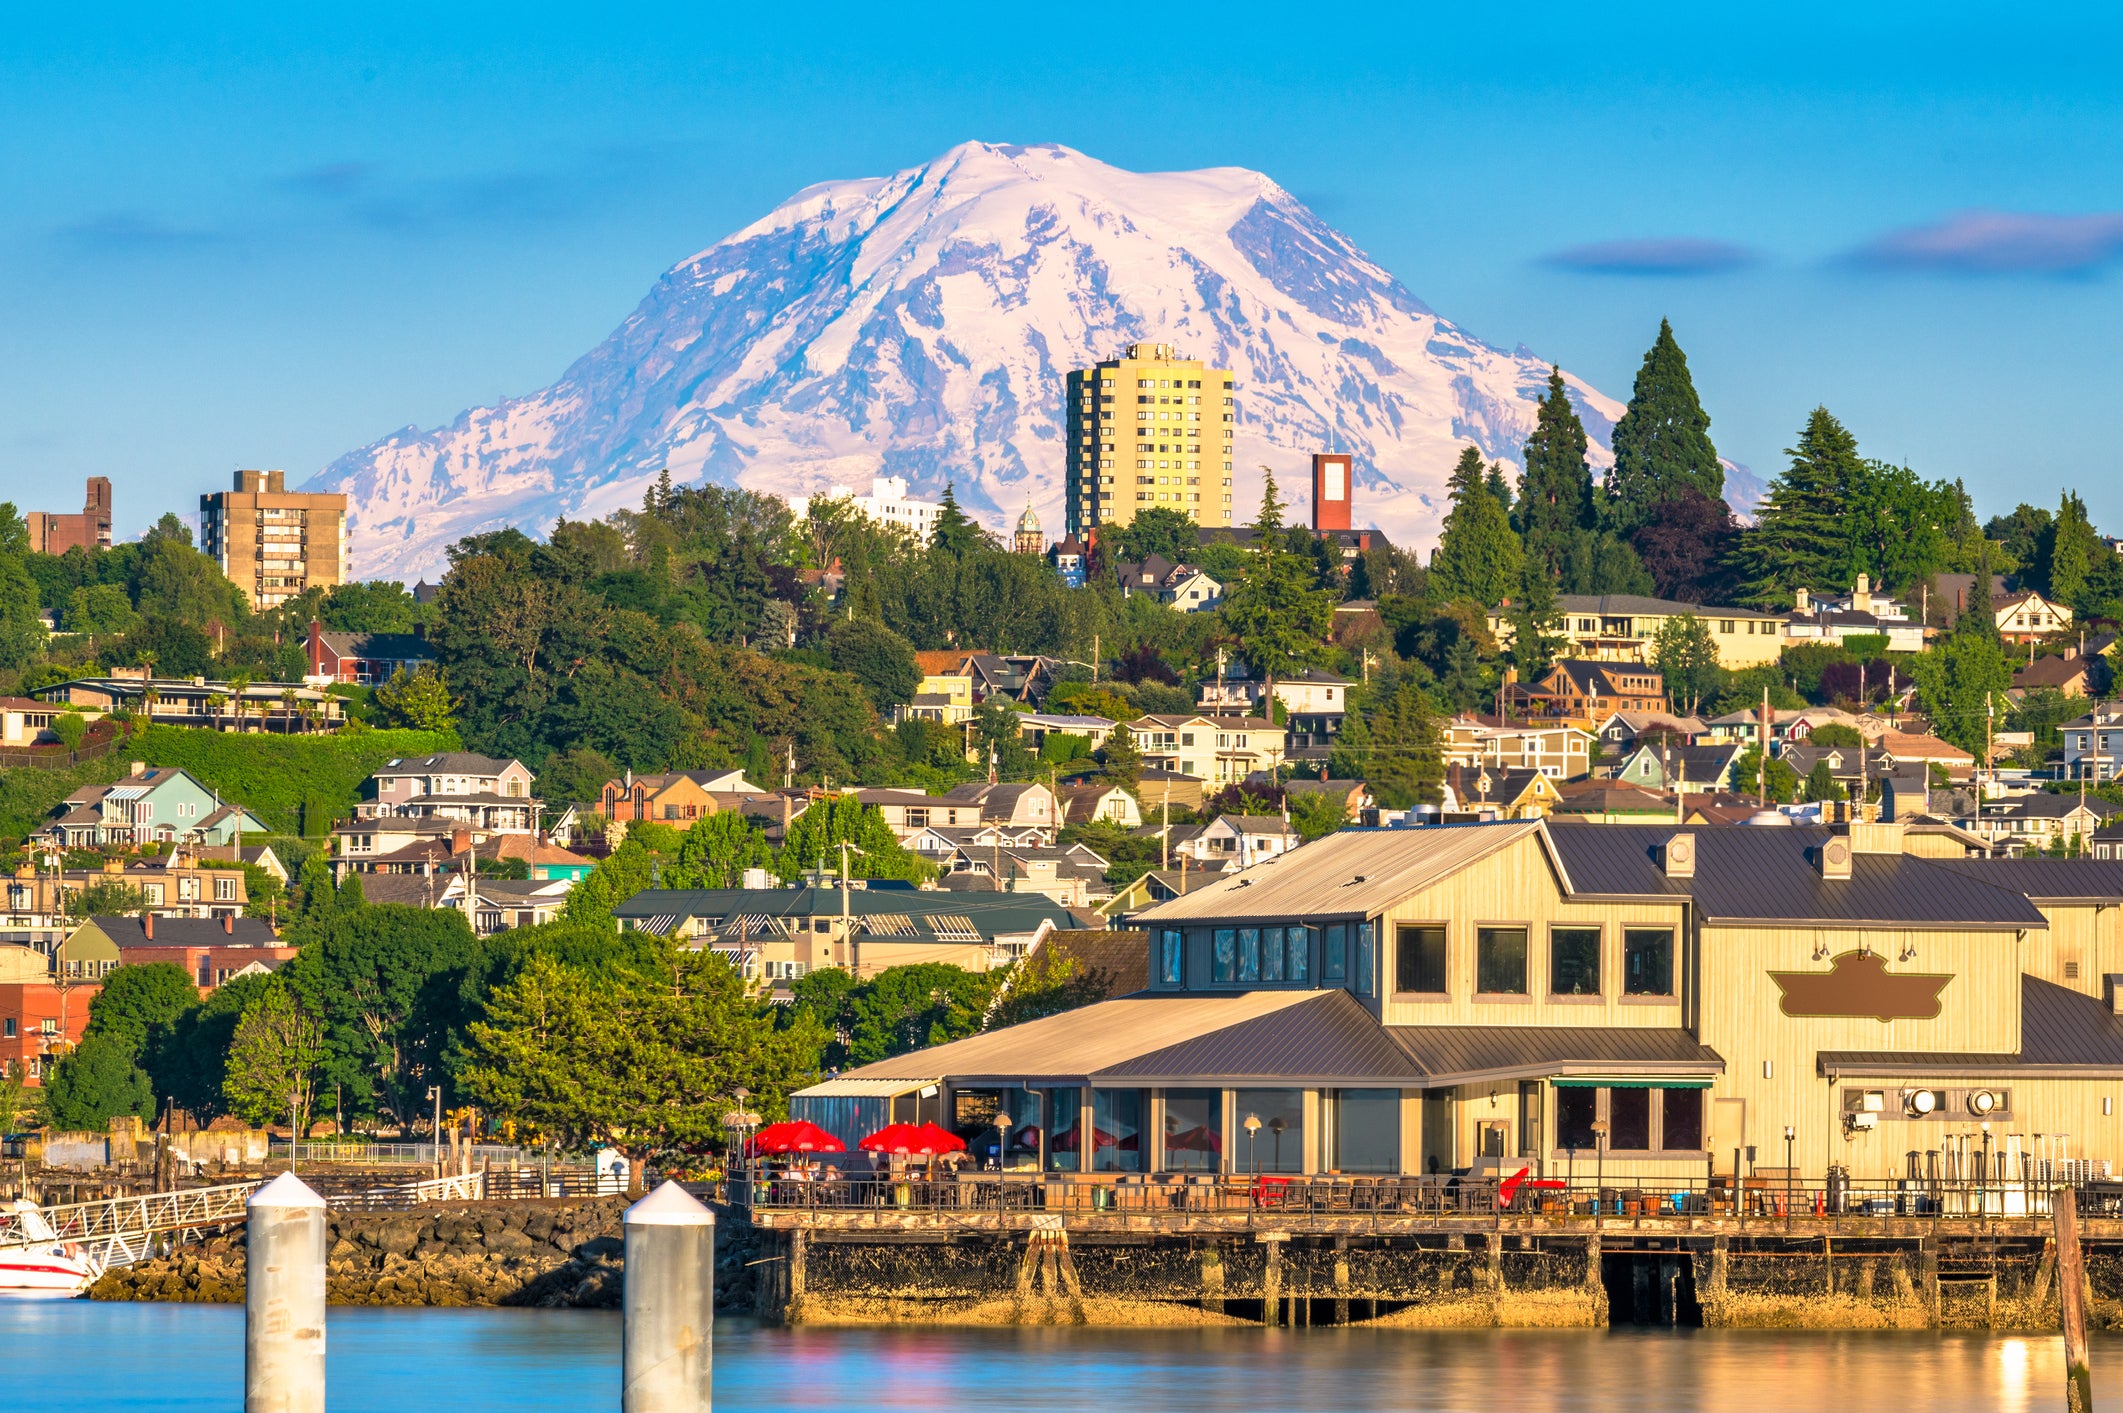 Tacoma, Washington, on Commencement Bay, with Mount Rainier in the distance